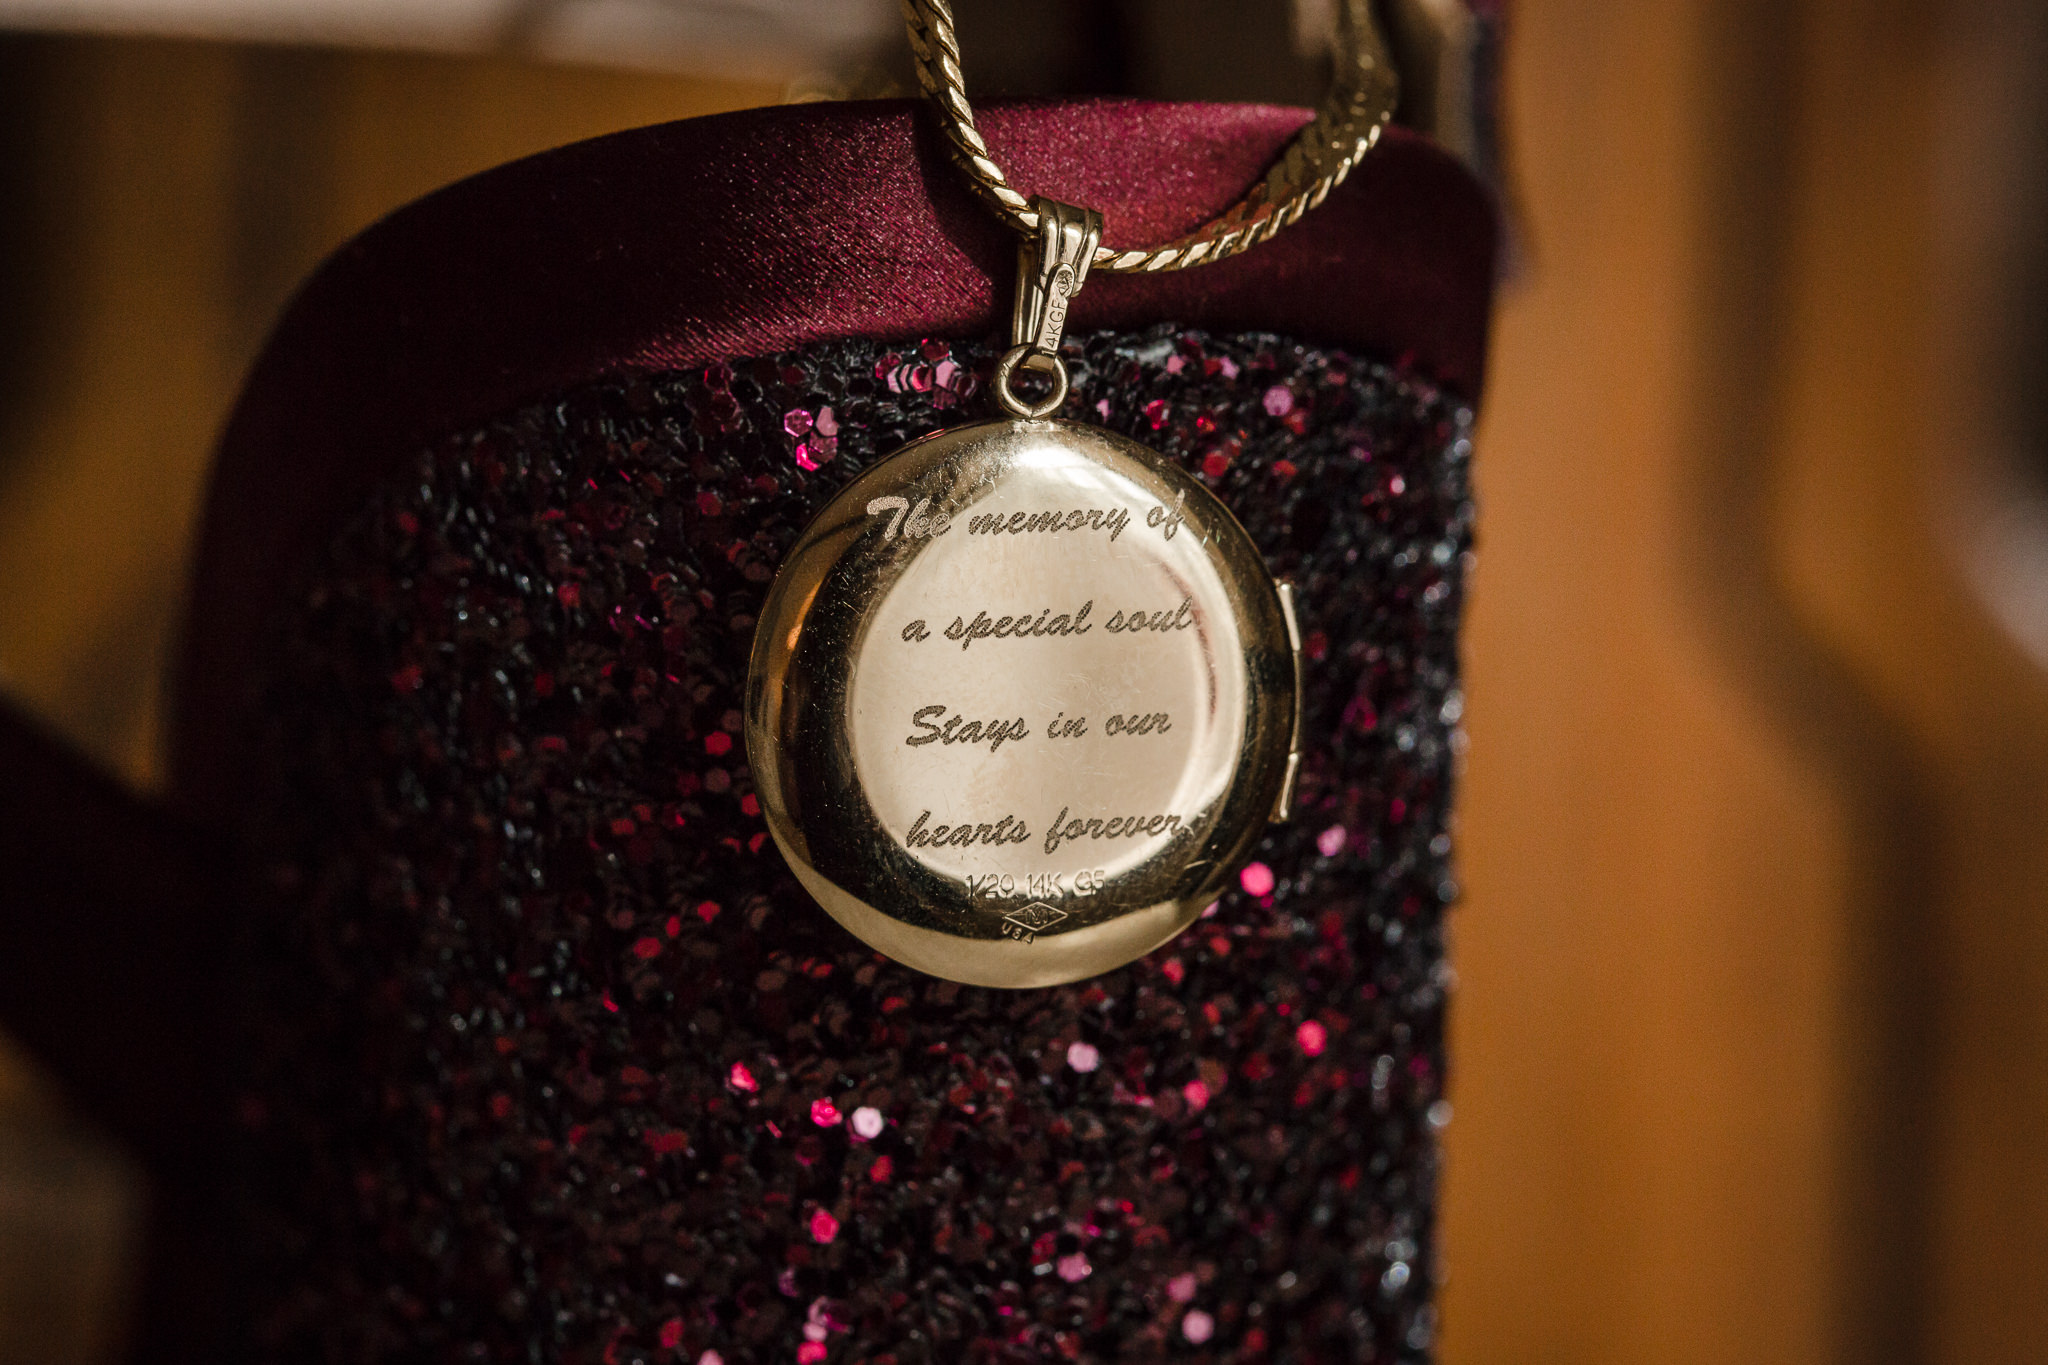 Memory locket for bride's father hangs from her wedding shoes